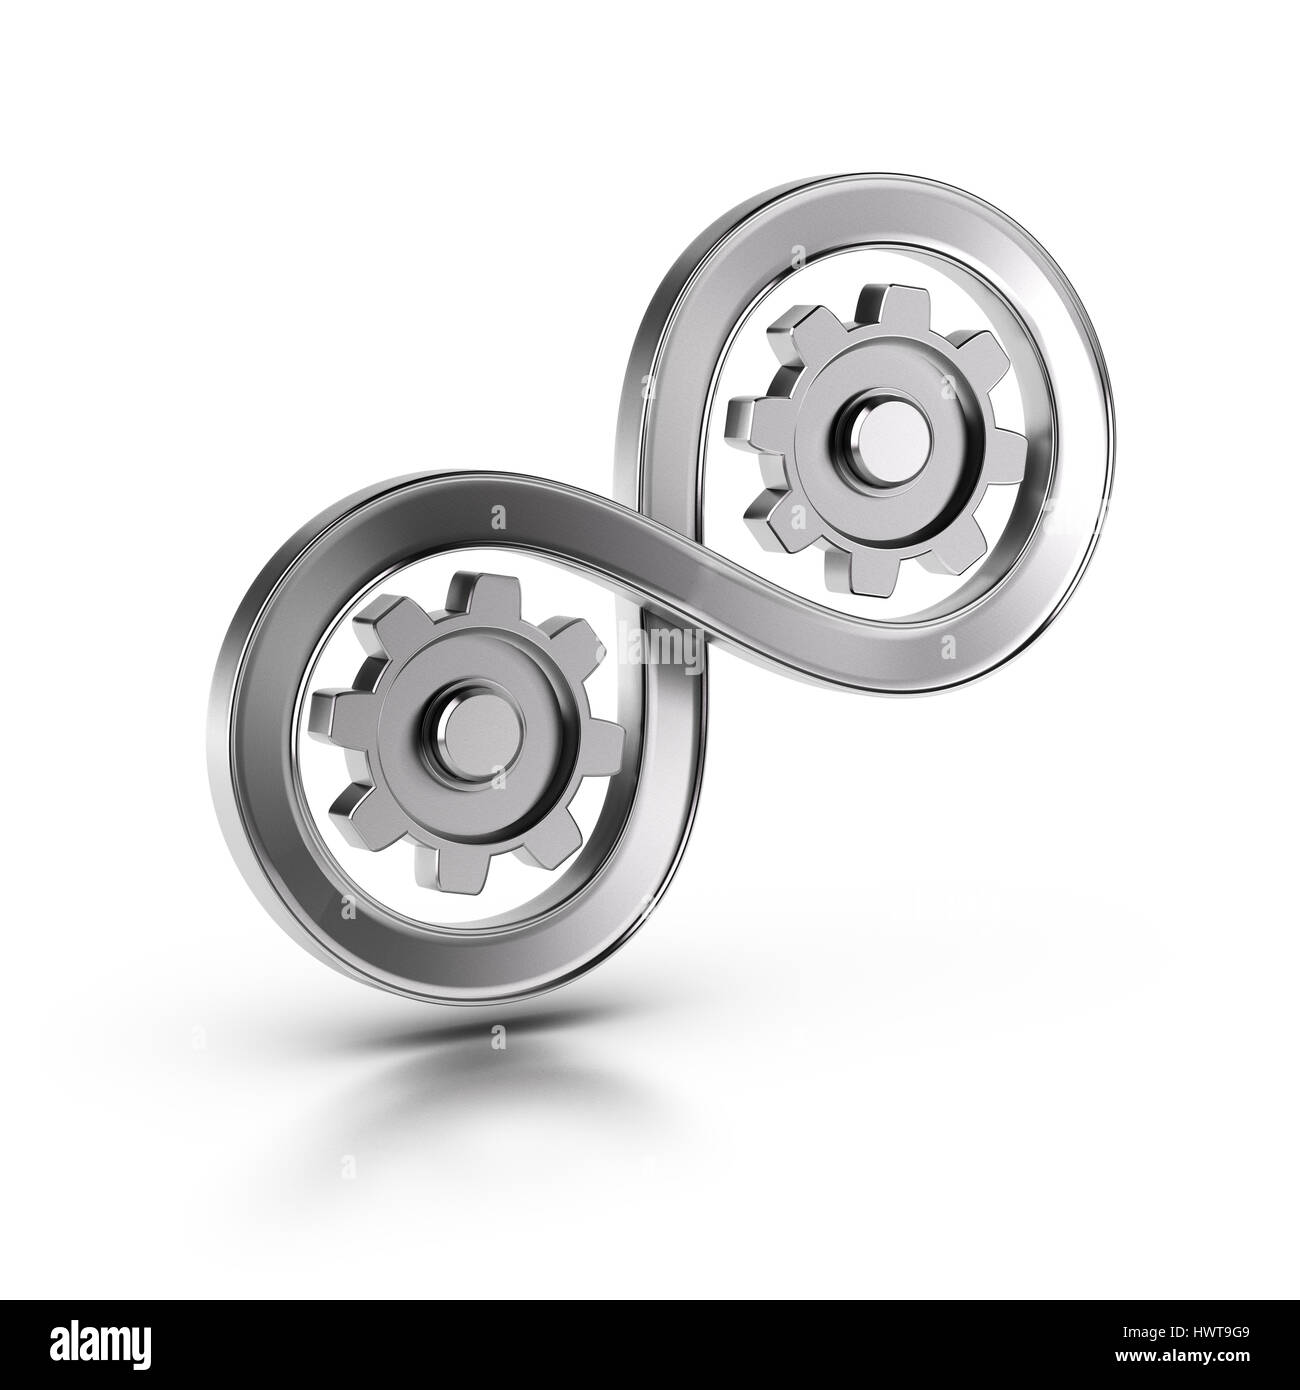 3D illustration of an infinite symbol and cog wheels over white background, Concept of manufacturing continuous improvement of processes.. Stock Photo